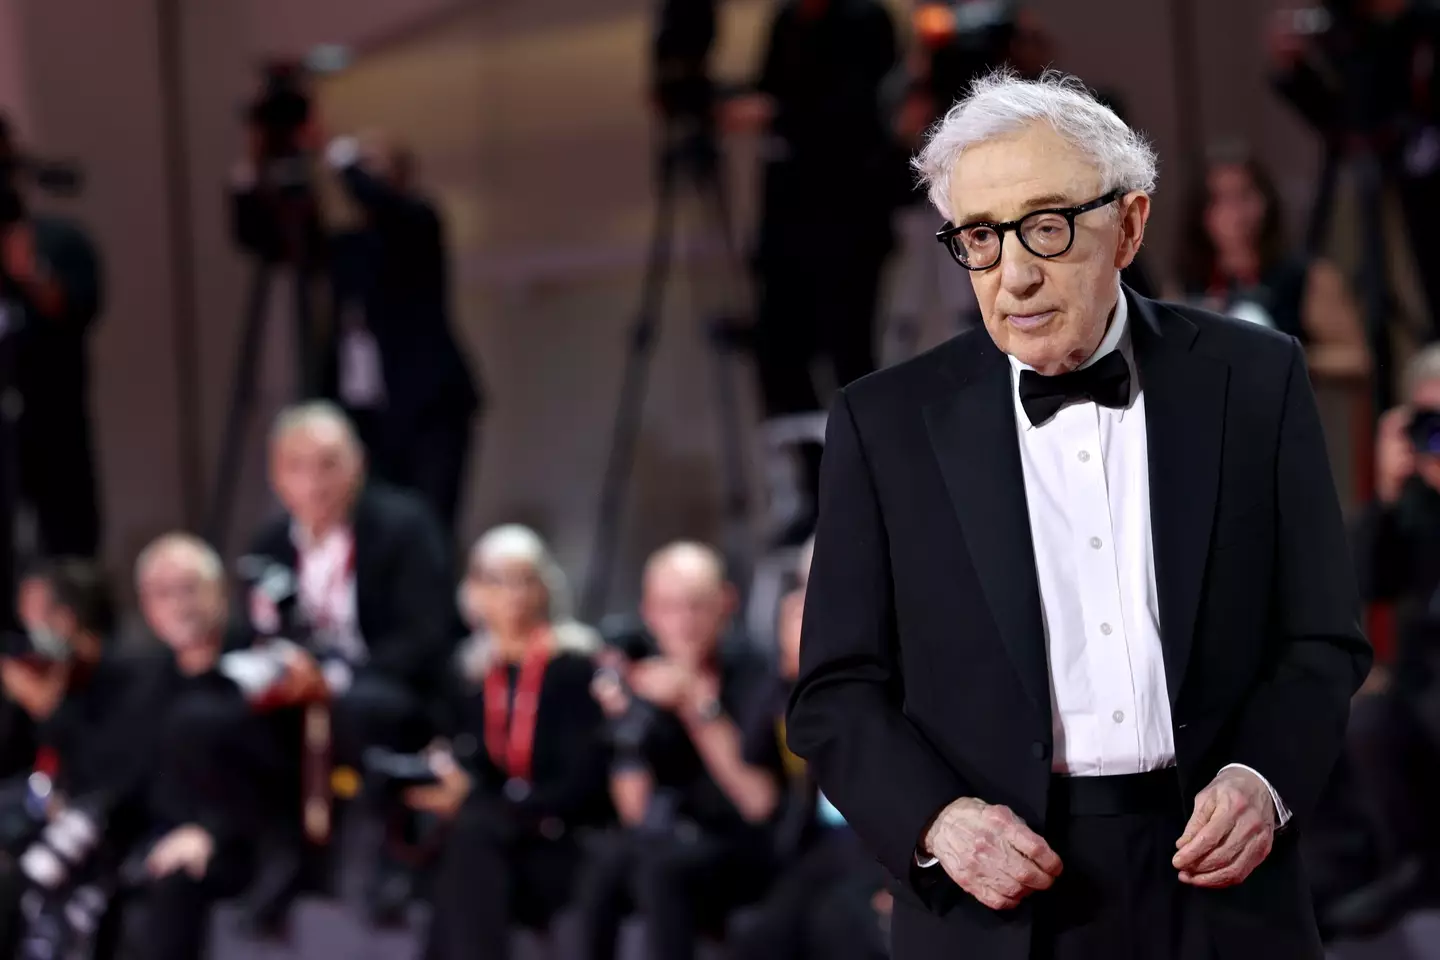 Woody Allen appeared at the film festival last night.